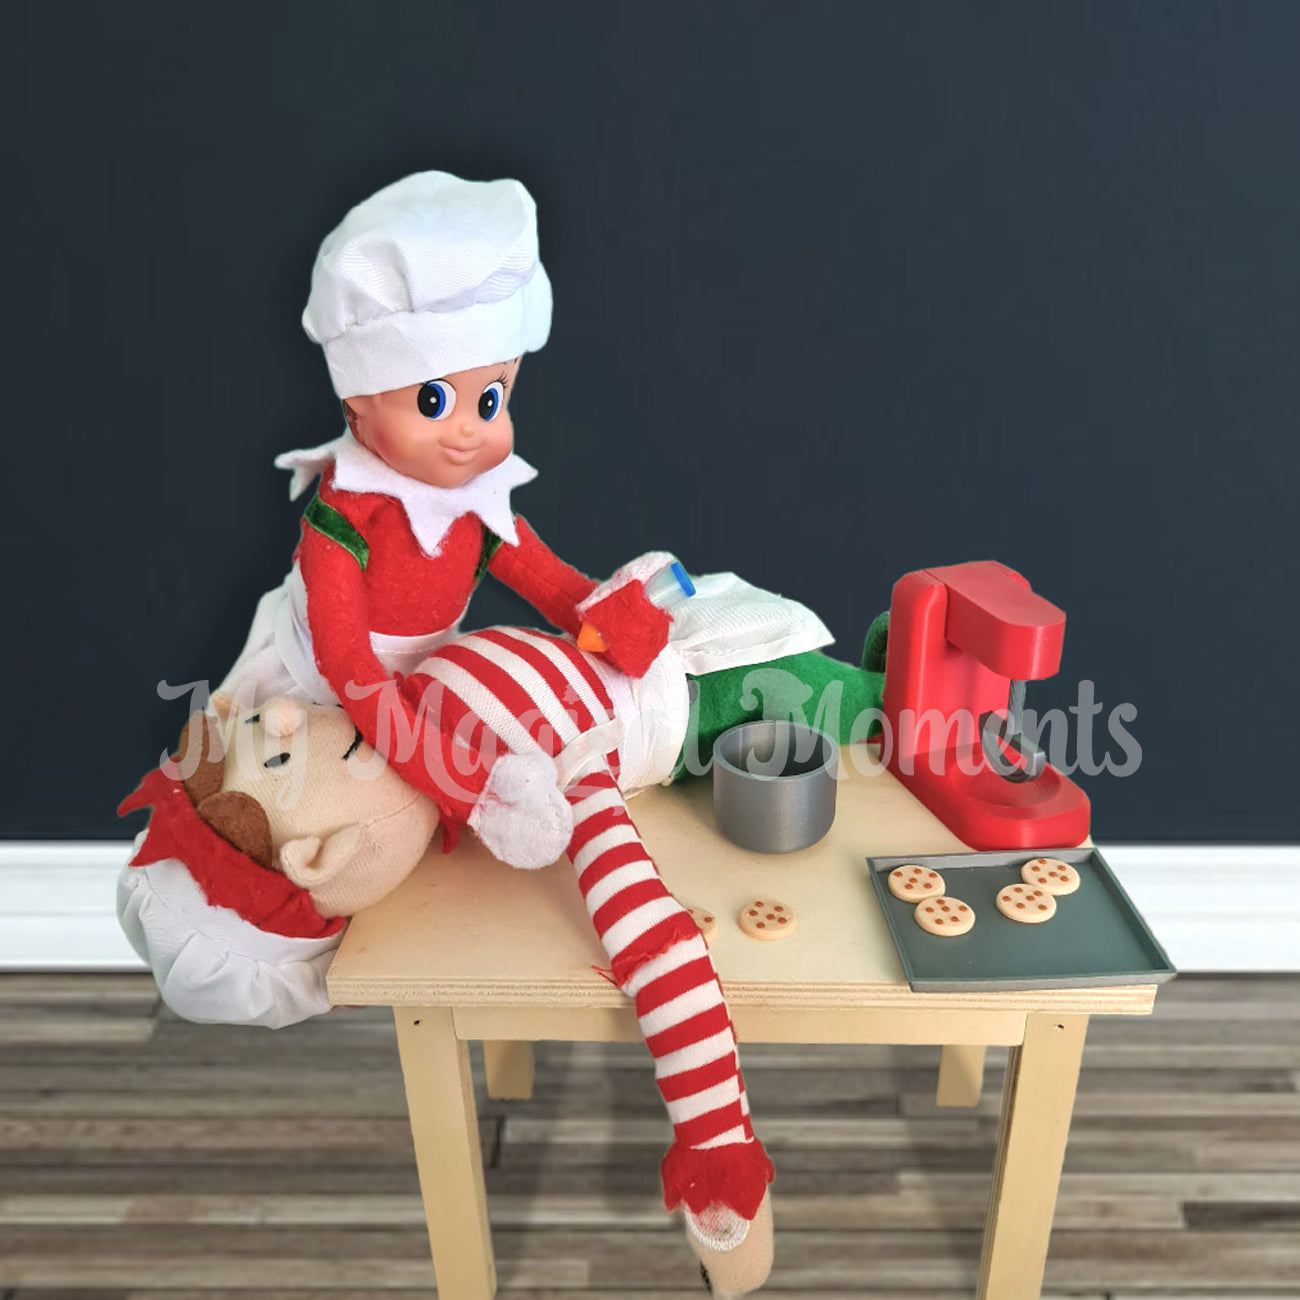 Elf for christmas having an anaphylactic episode from cooking. chef elf is administrating an epi pen